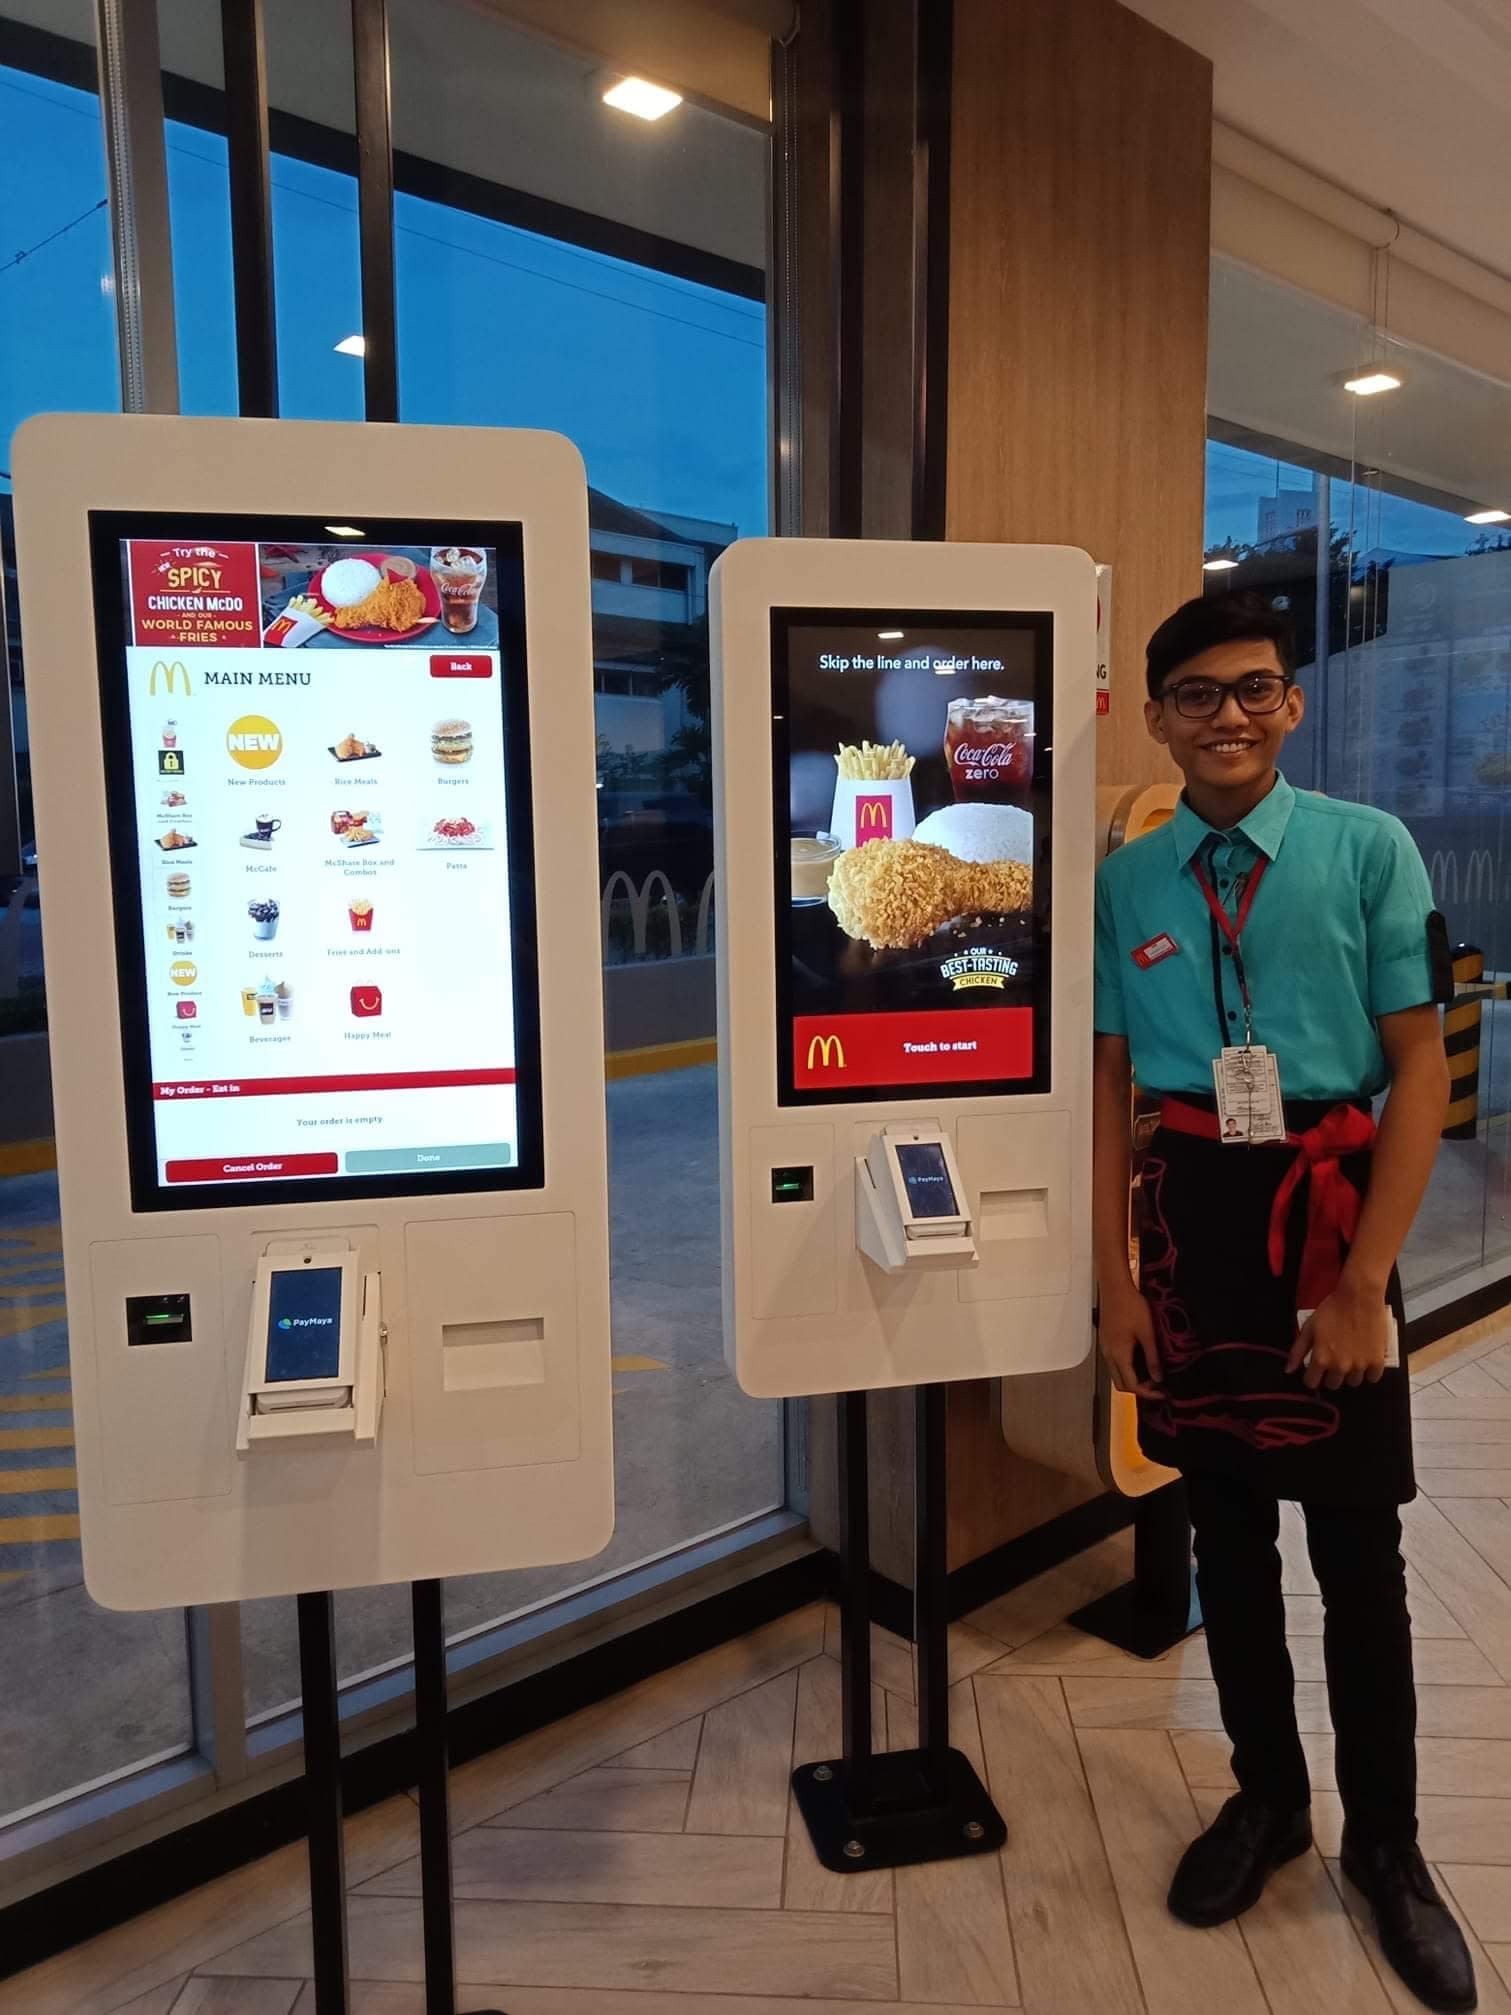 Are You Looking Forward To Using The Self Ordering Kiosk At Mcdonalds 2490